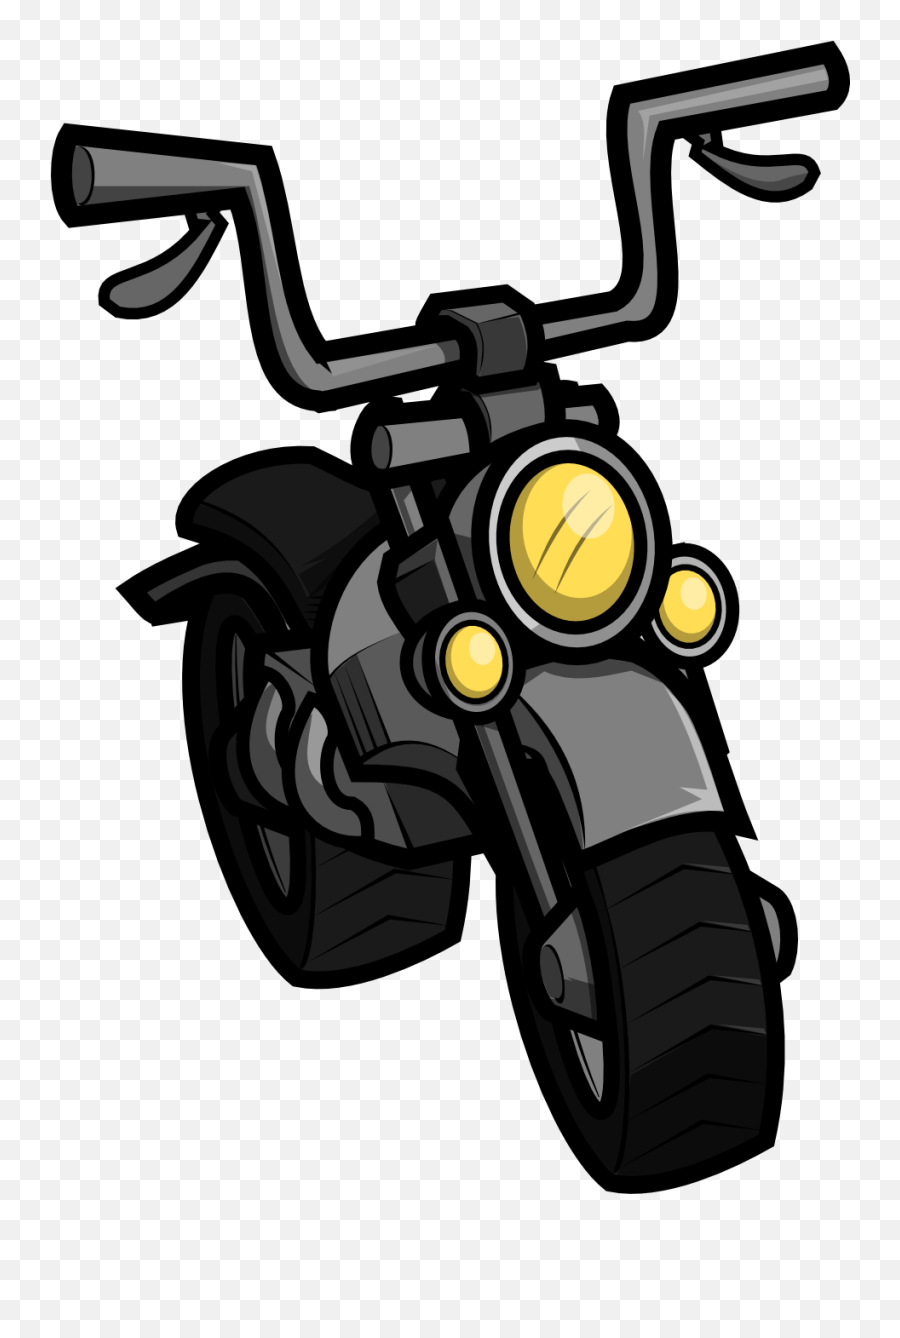 Free Motorcycle Clipart Pictures - Clipartix Clipart Motorcycle Cartoon Emoji,Harley Davidson Clipart